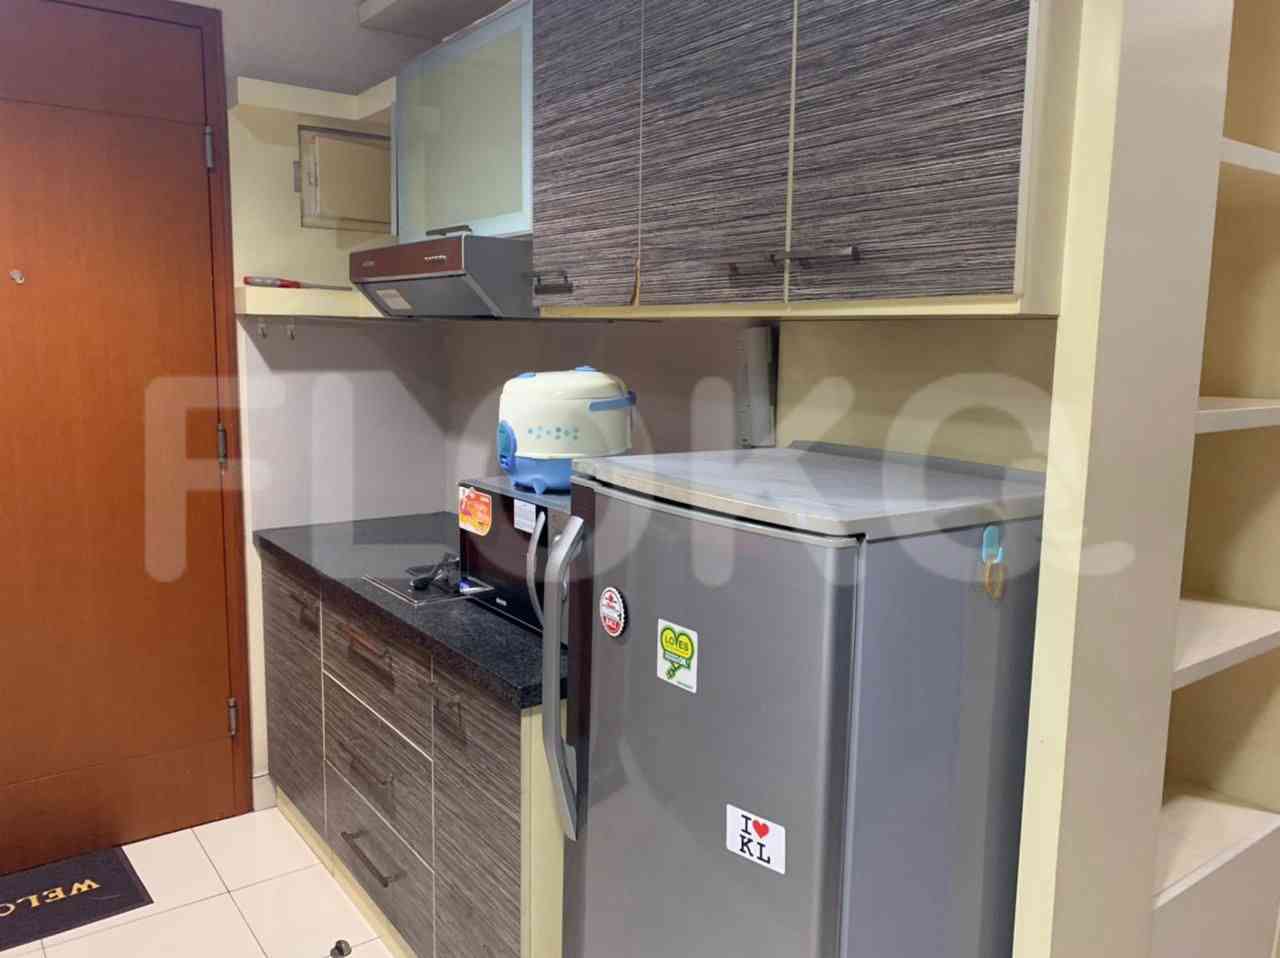 1 Bedroom on 6th Floor for Rent in Kuningan Place Apartment - fkued1 7